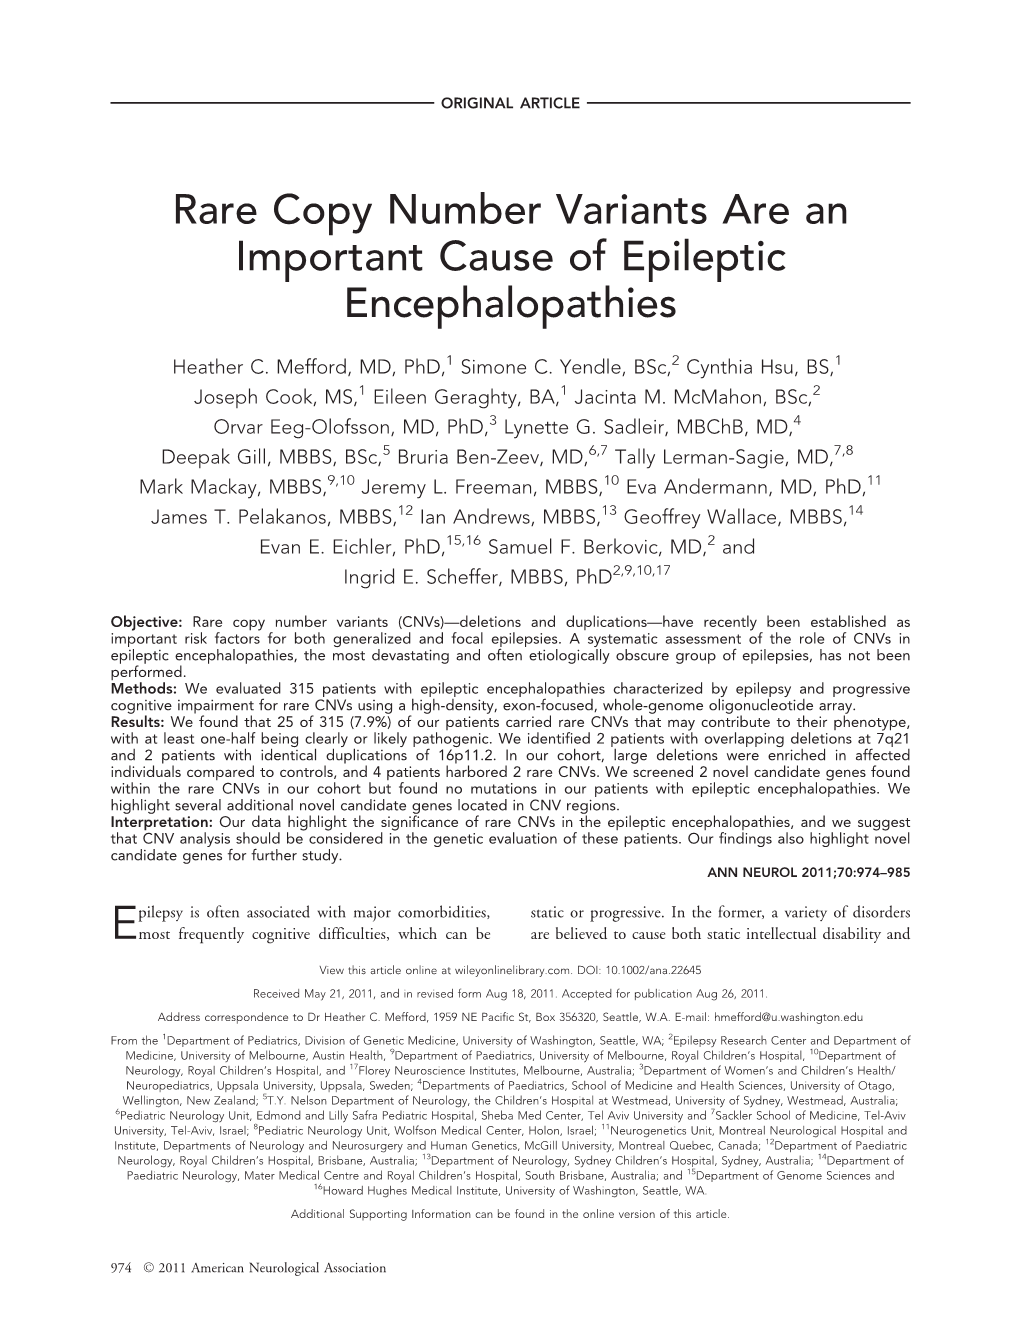 Rare Copy Number Variants Are an Important Cause of Epileptic Encephalopathies